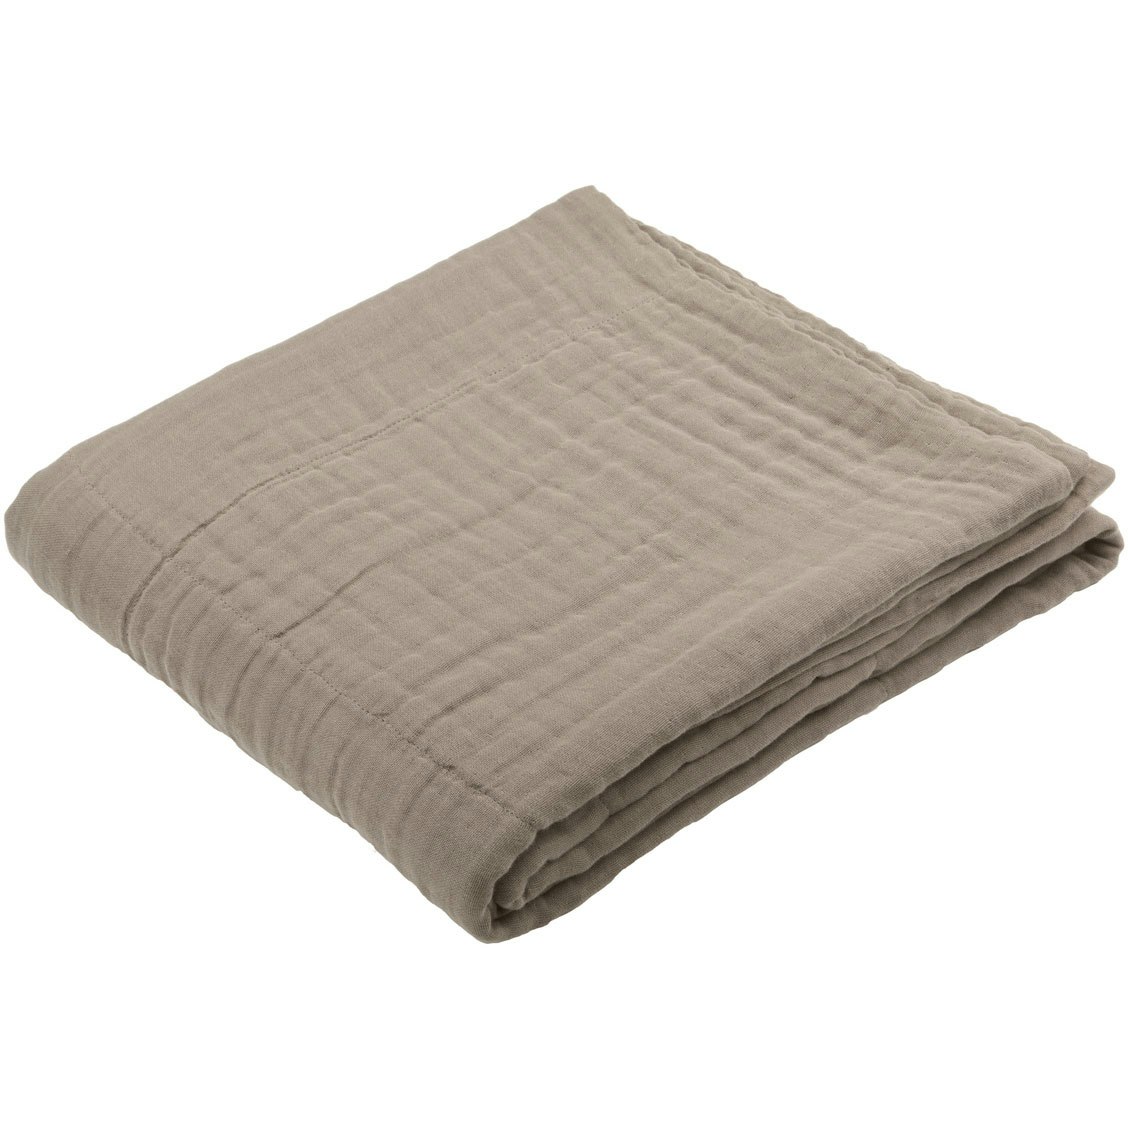 6-Layer Soft Blanket, Clay